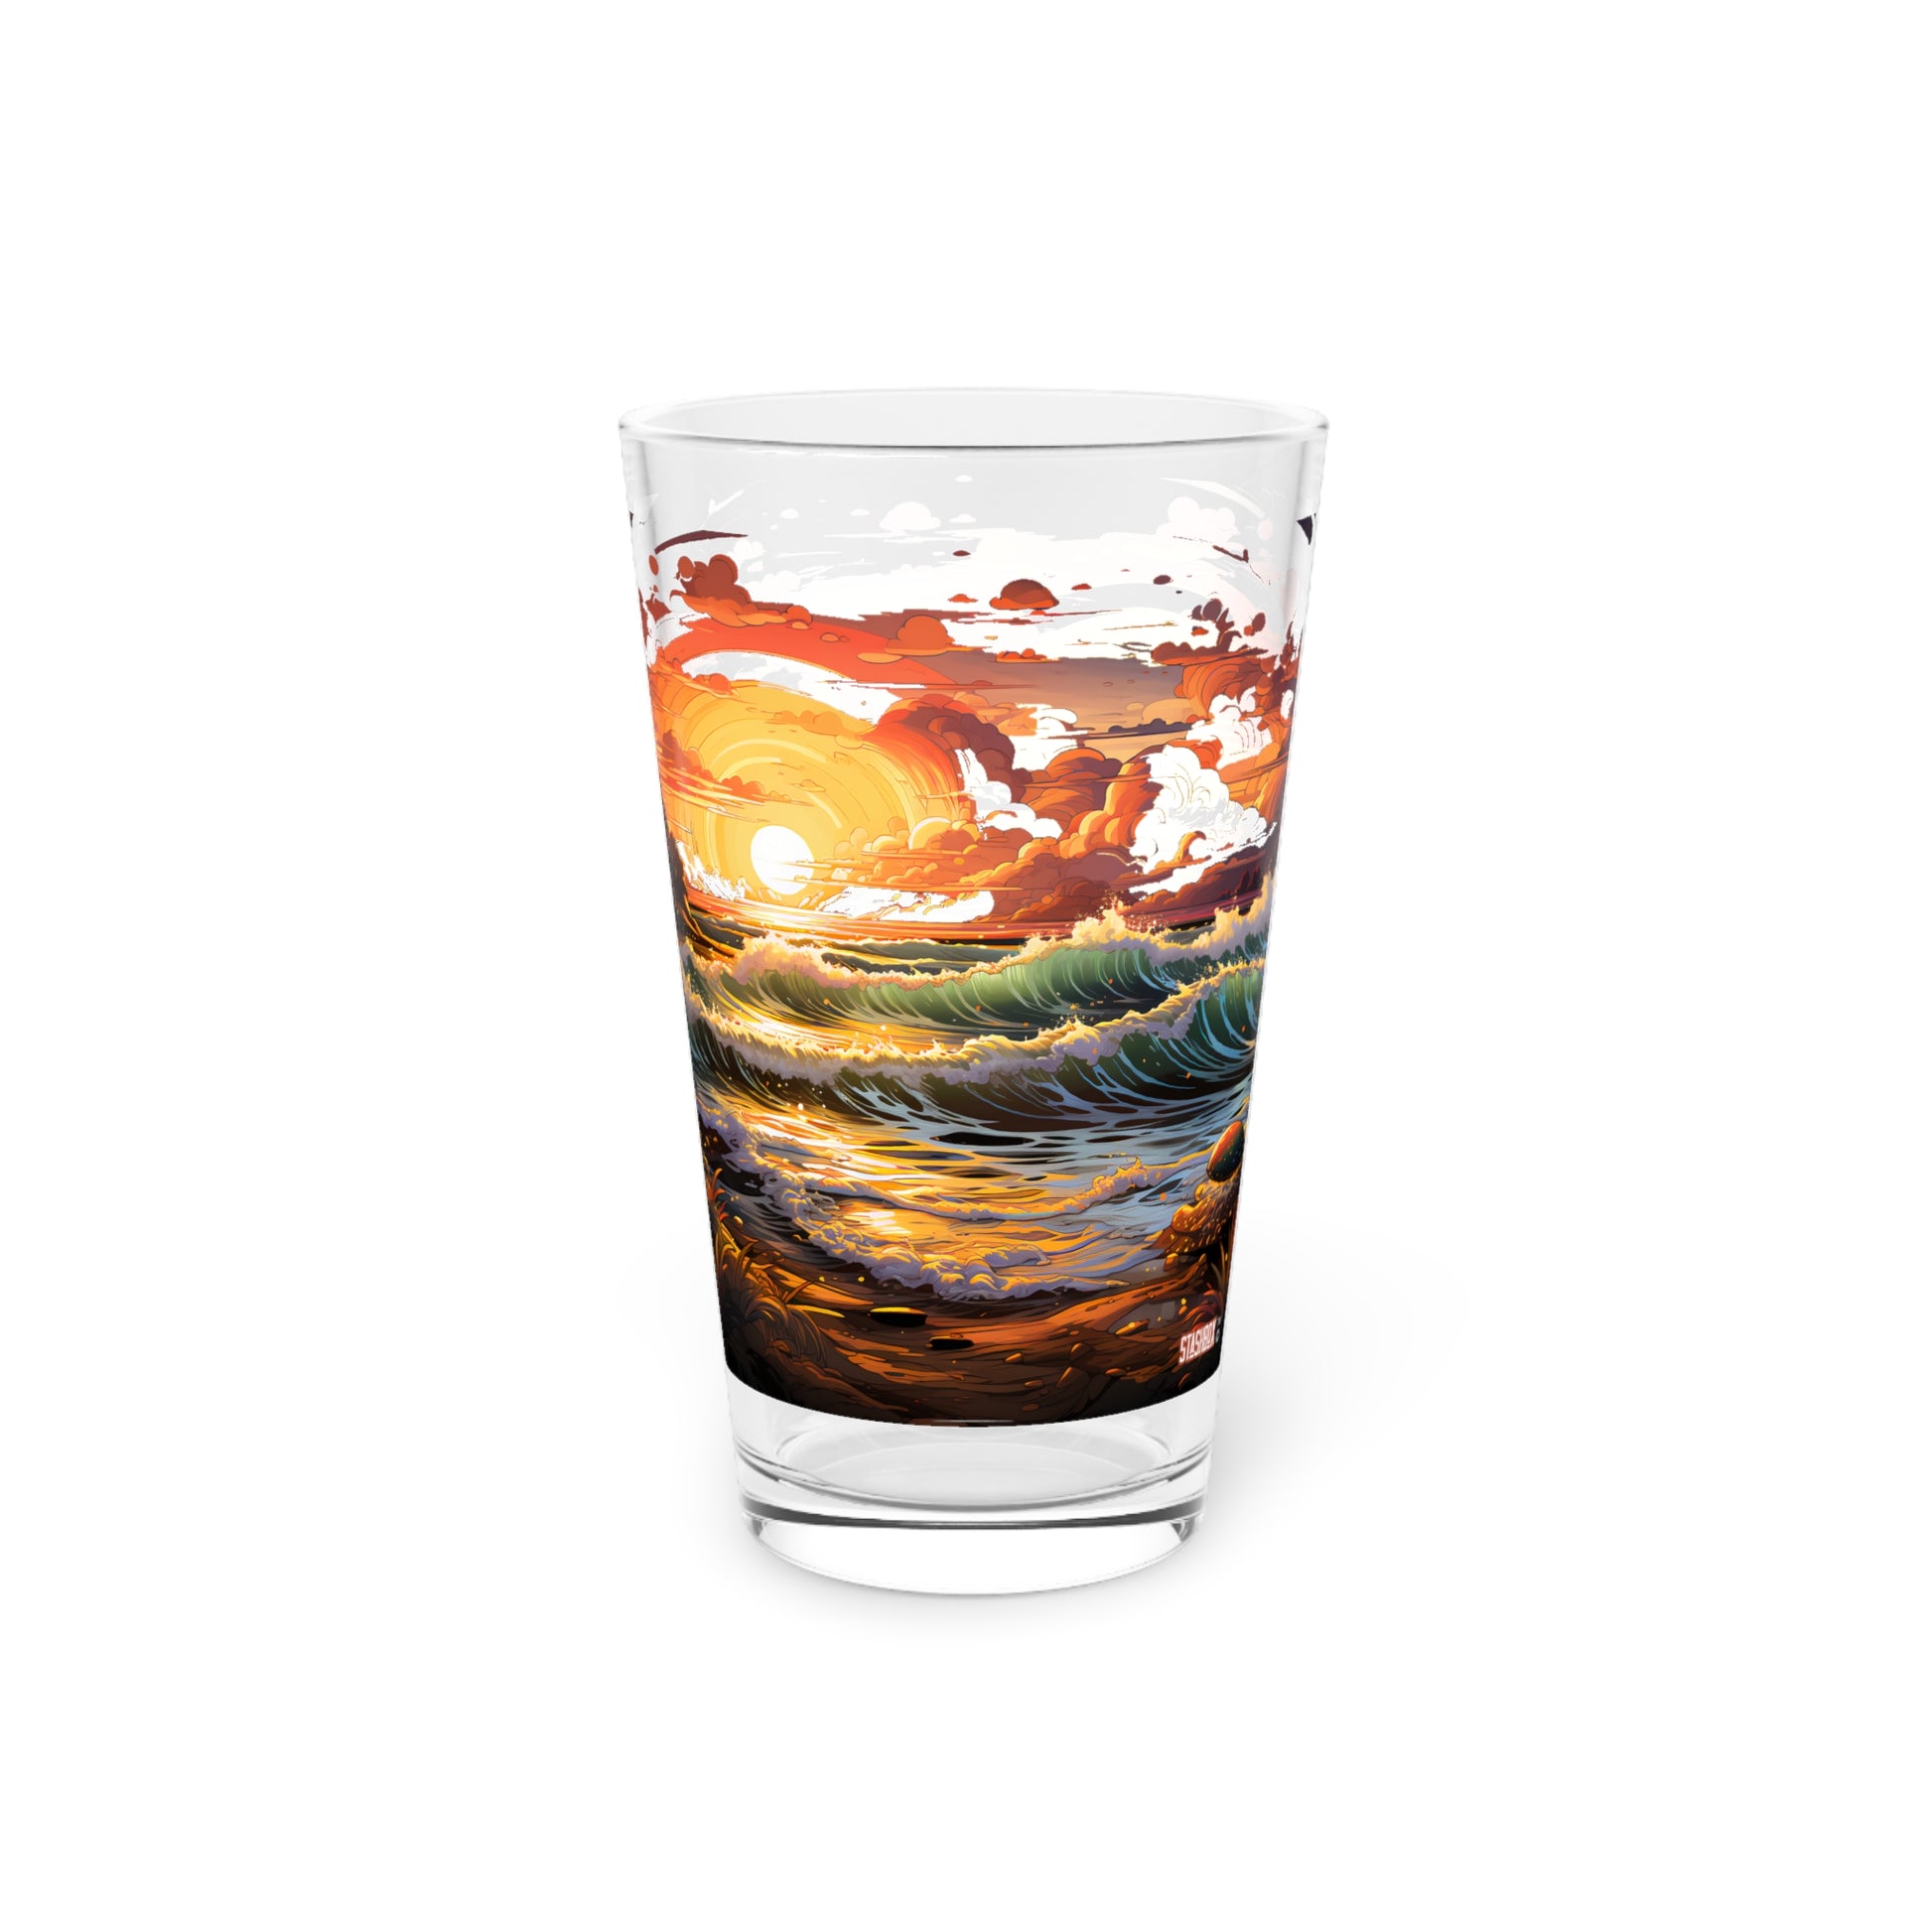 "Dive into a world of whimsy with our Cartoon Fantasy Beach Waves Pint Glass, 16oz - Waves Design #054. Perfect for those who love playful designs and the calming essence of the ocean. Exclusively available at Stashbox.ai